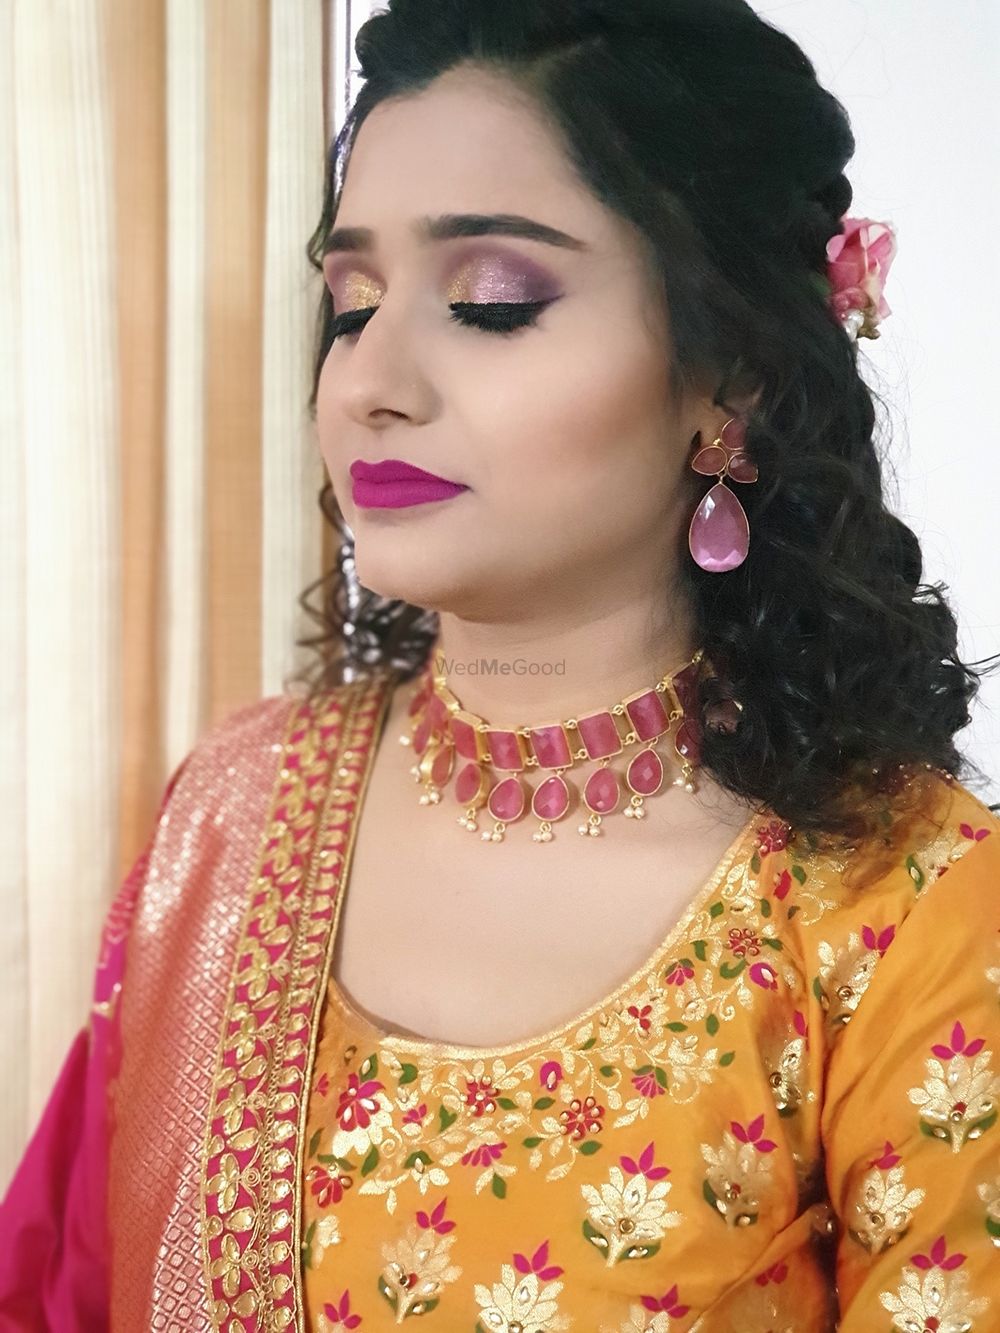 Photo From Marwadibridallook - By Beauty by Sonali